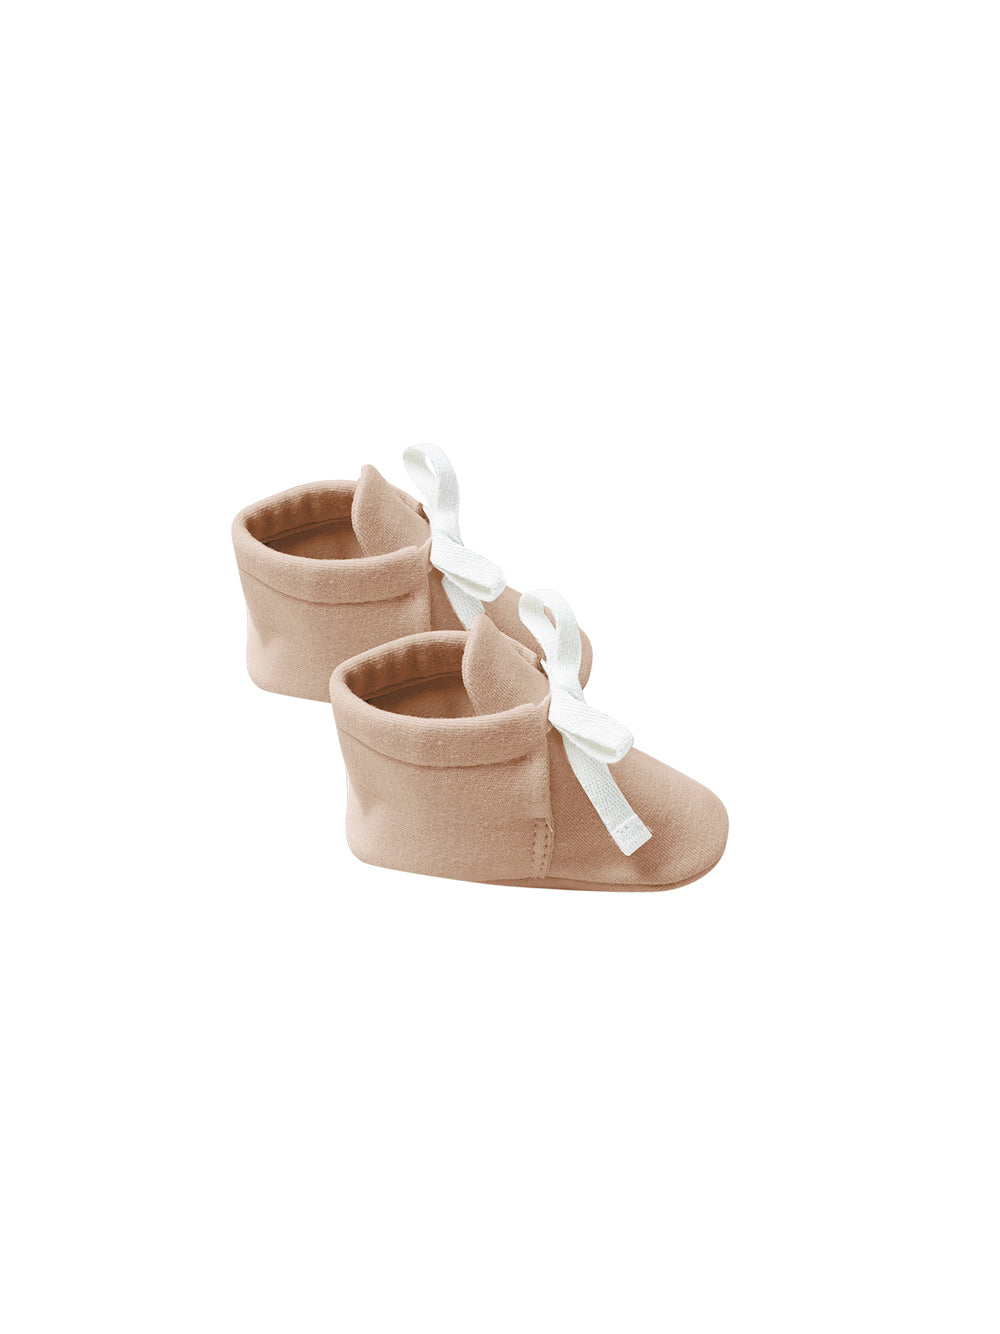 Quincy Mae Baby Booties - Blush